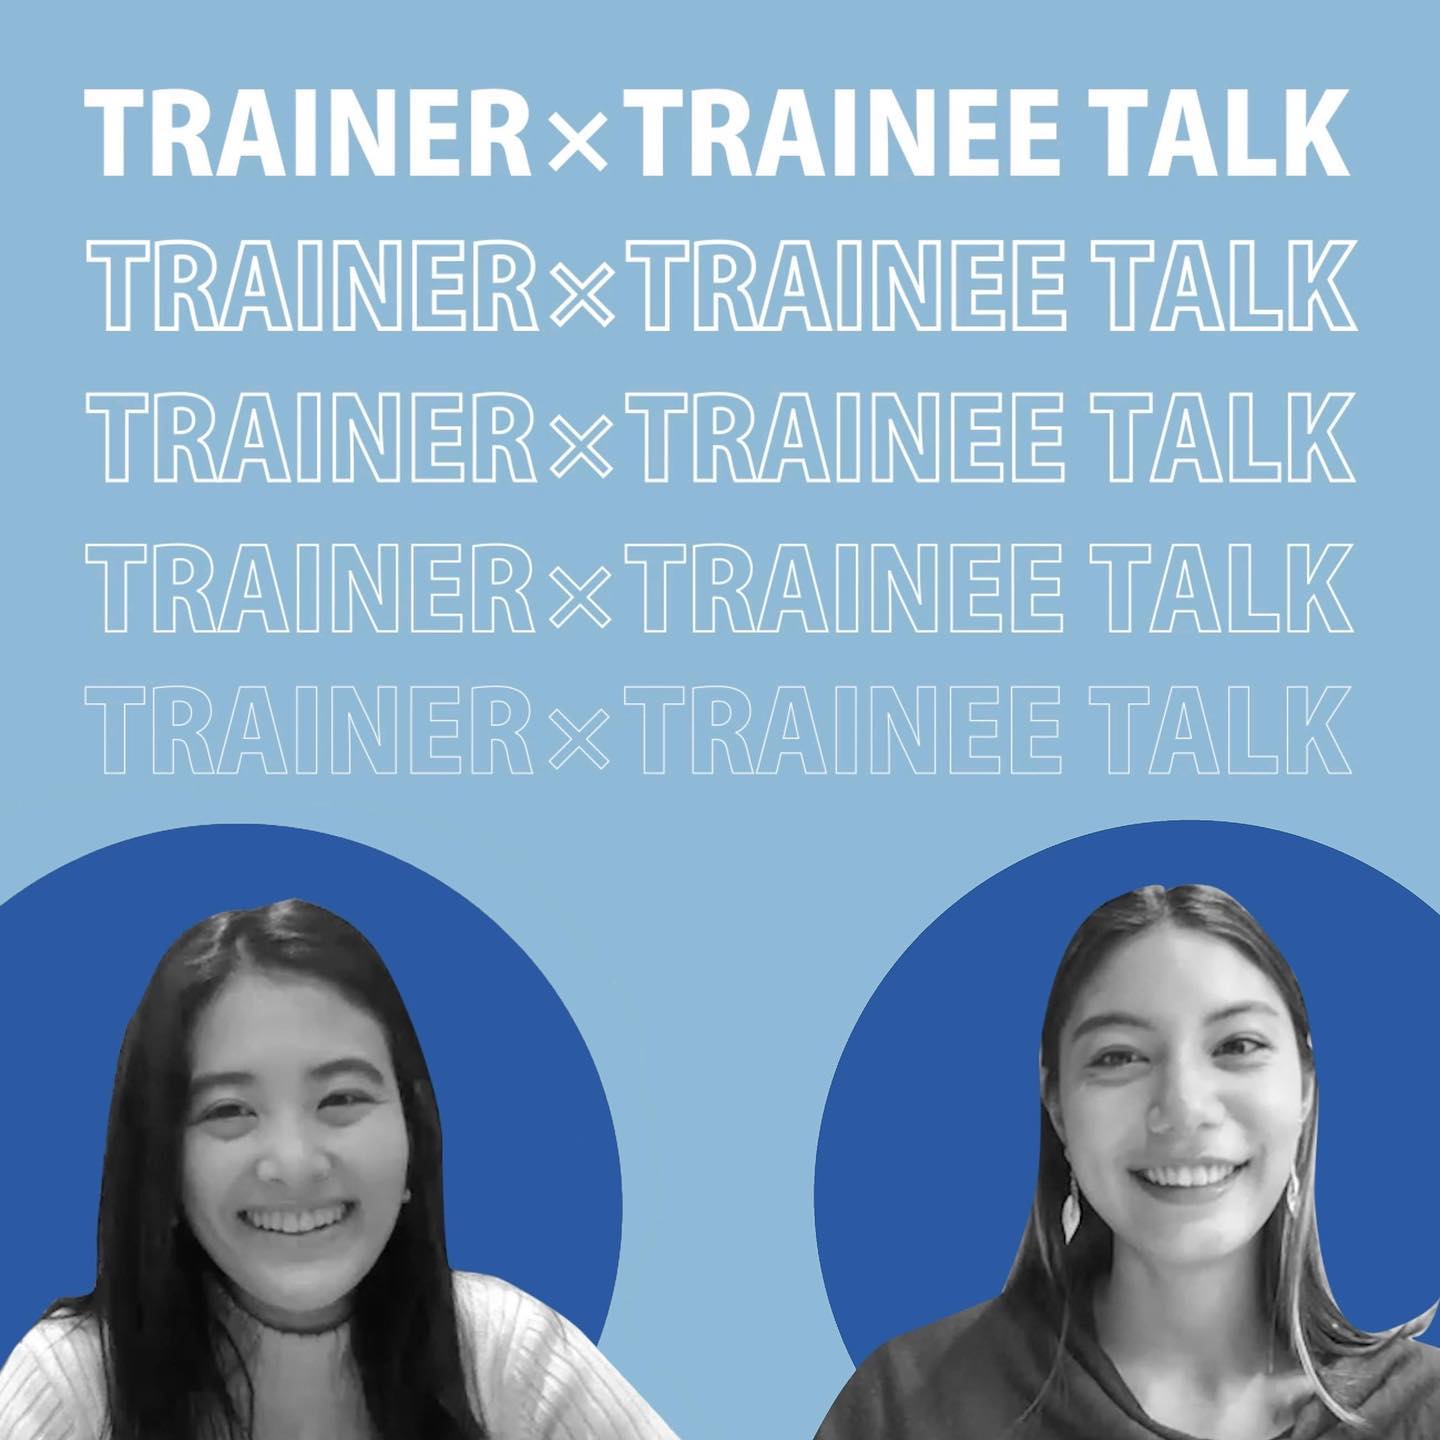 TRAINER×TRAINEE TALK
Watch two of our global production managers talk about their experience working at AOI Global!
Watch the video on @aoirecruit 's IGTV
・・・